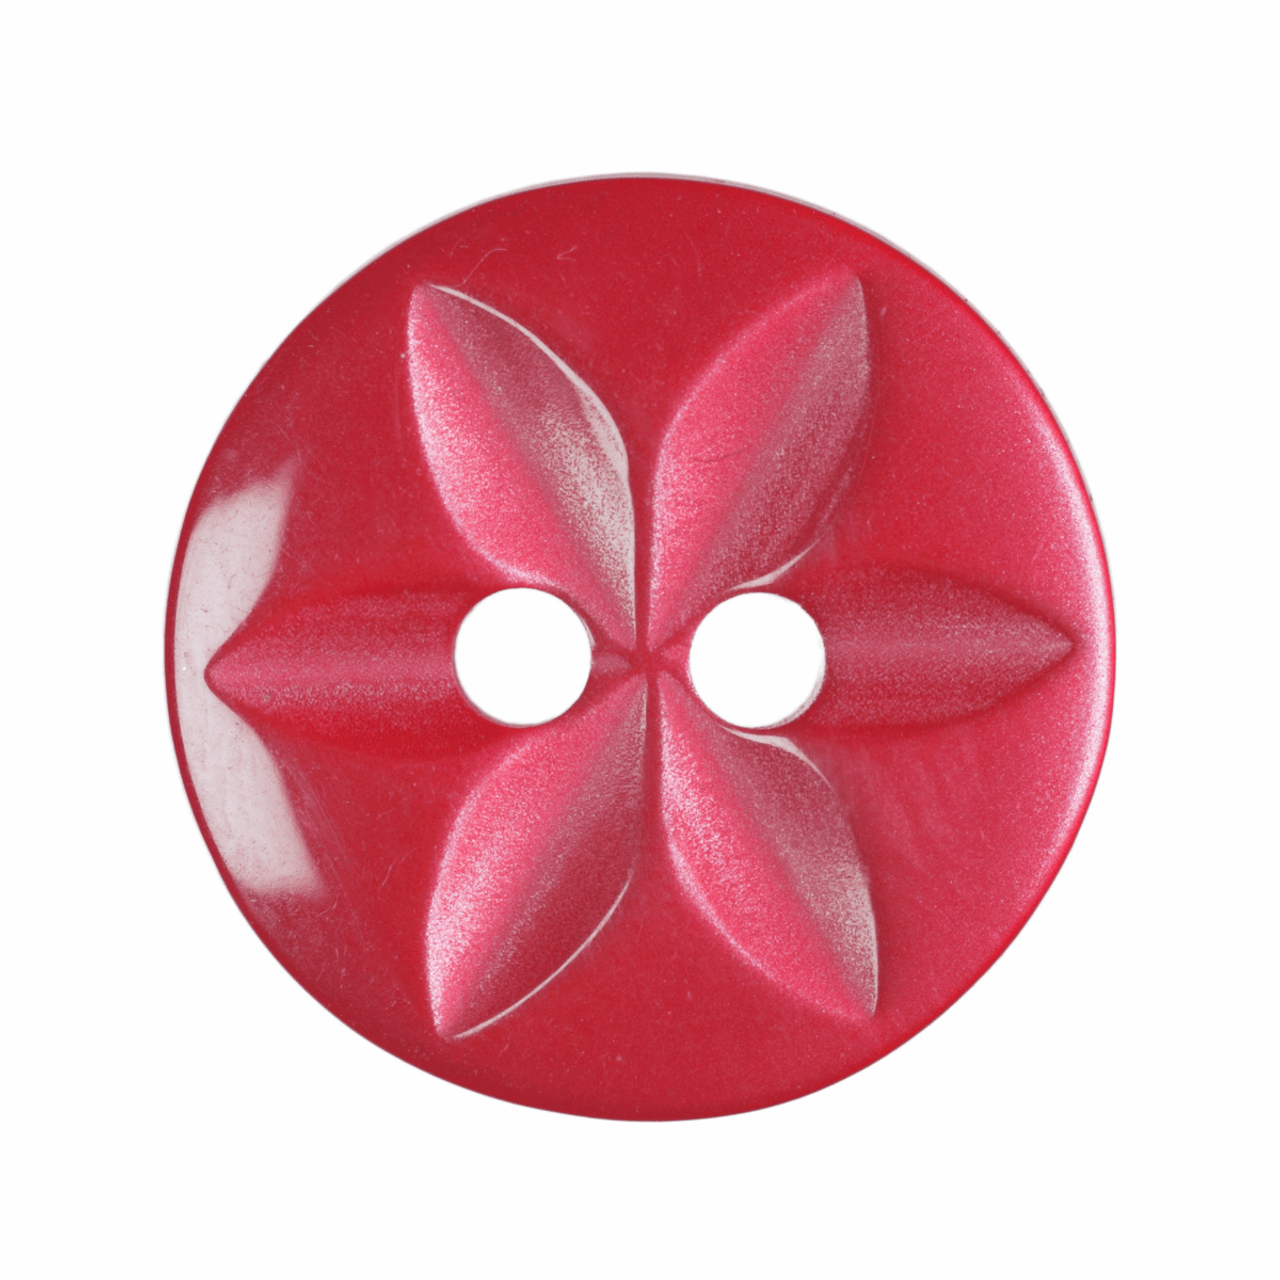 Red Star Button, 14mm (9/16in) Diameter (Sold Individually)